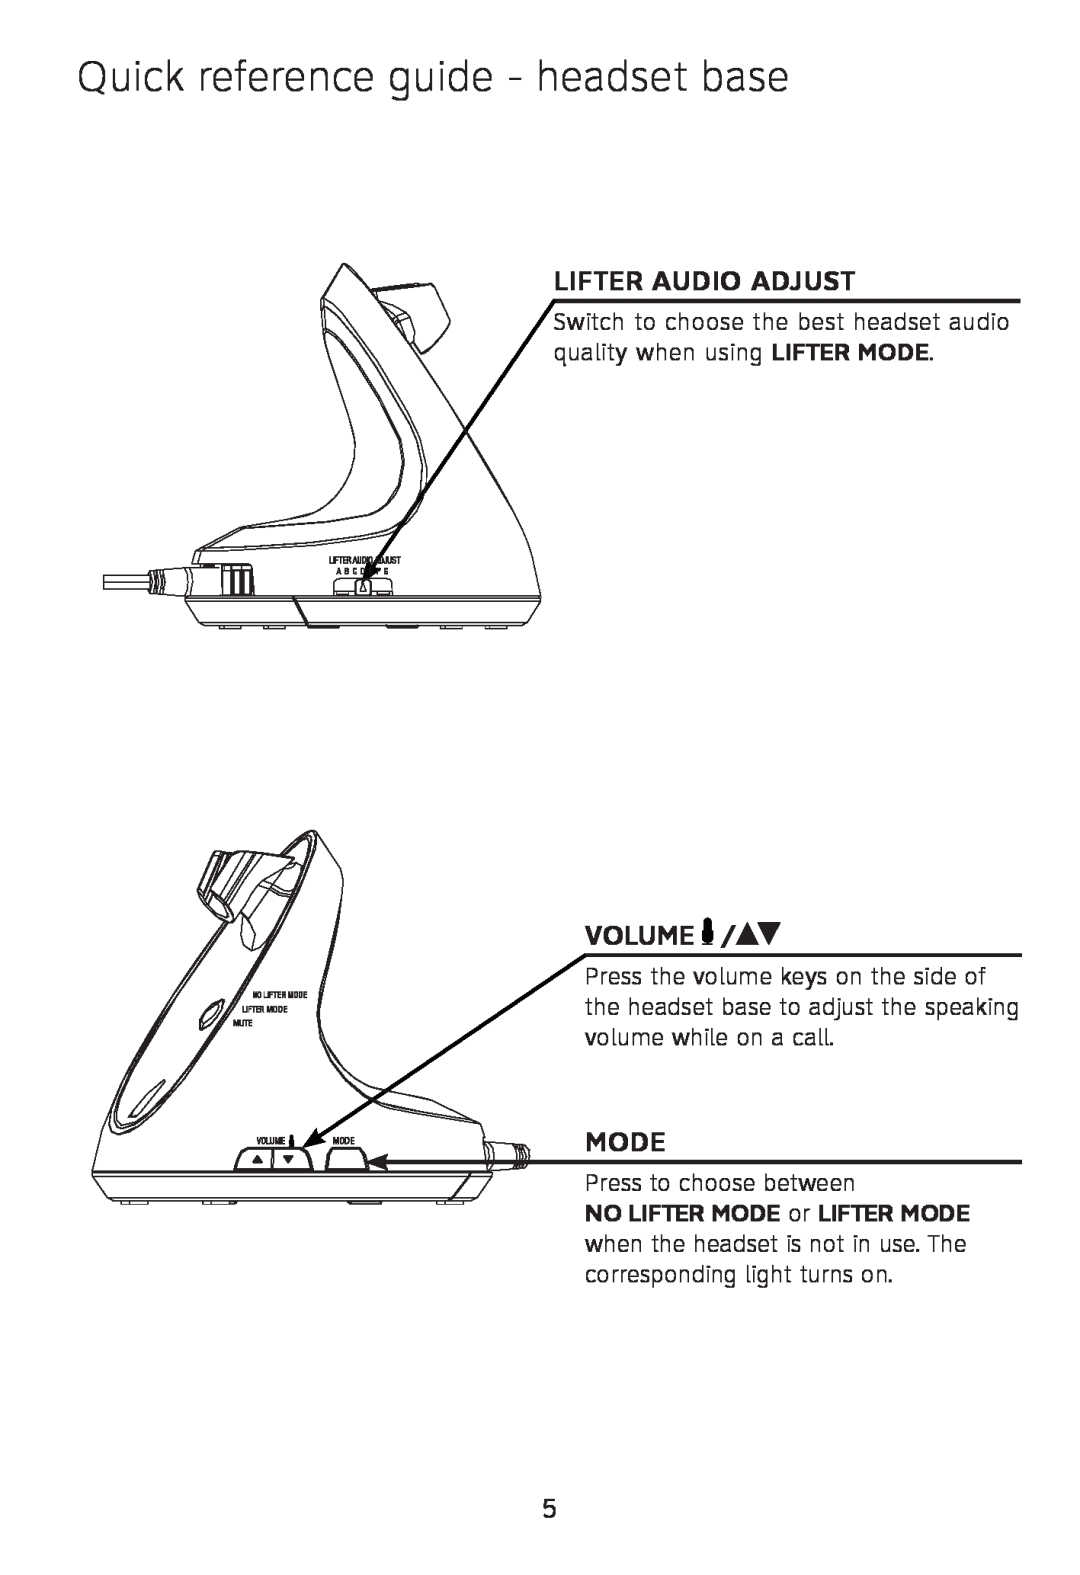 AT&T TL7612 quick start Quick reference guide - headset base, Lifter Audio Adjust, Volume, Mode, Press to choose between 